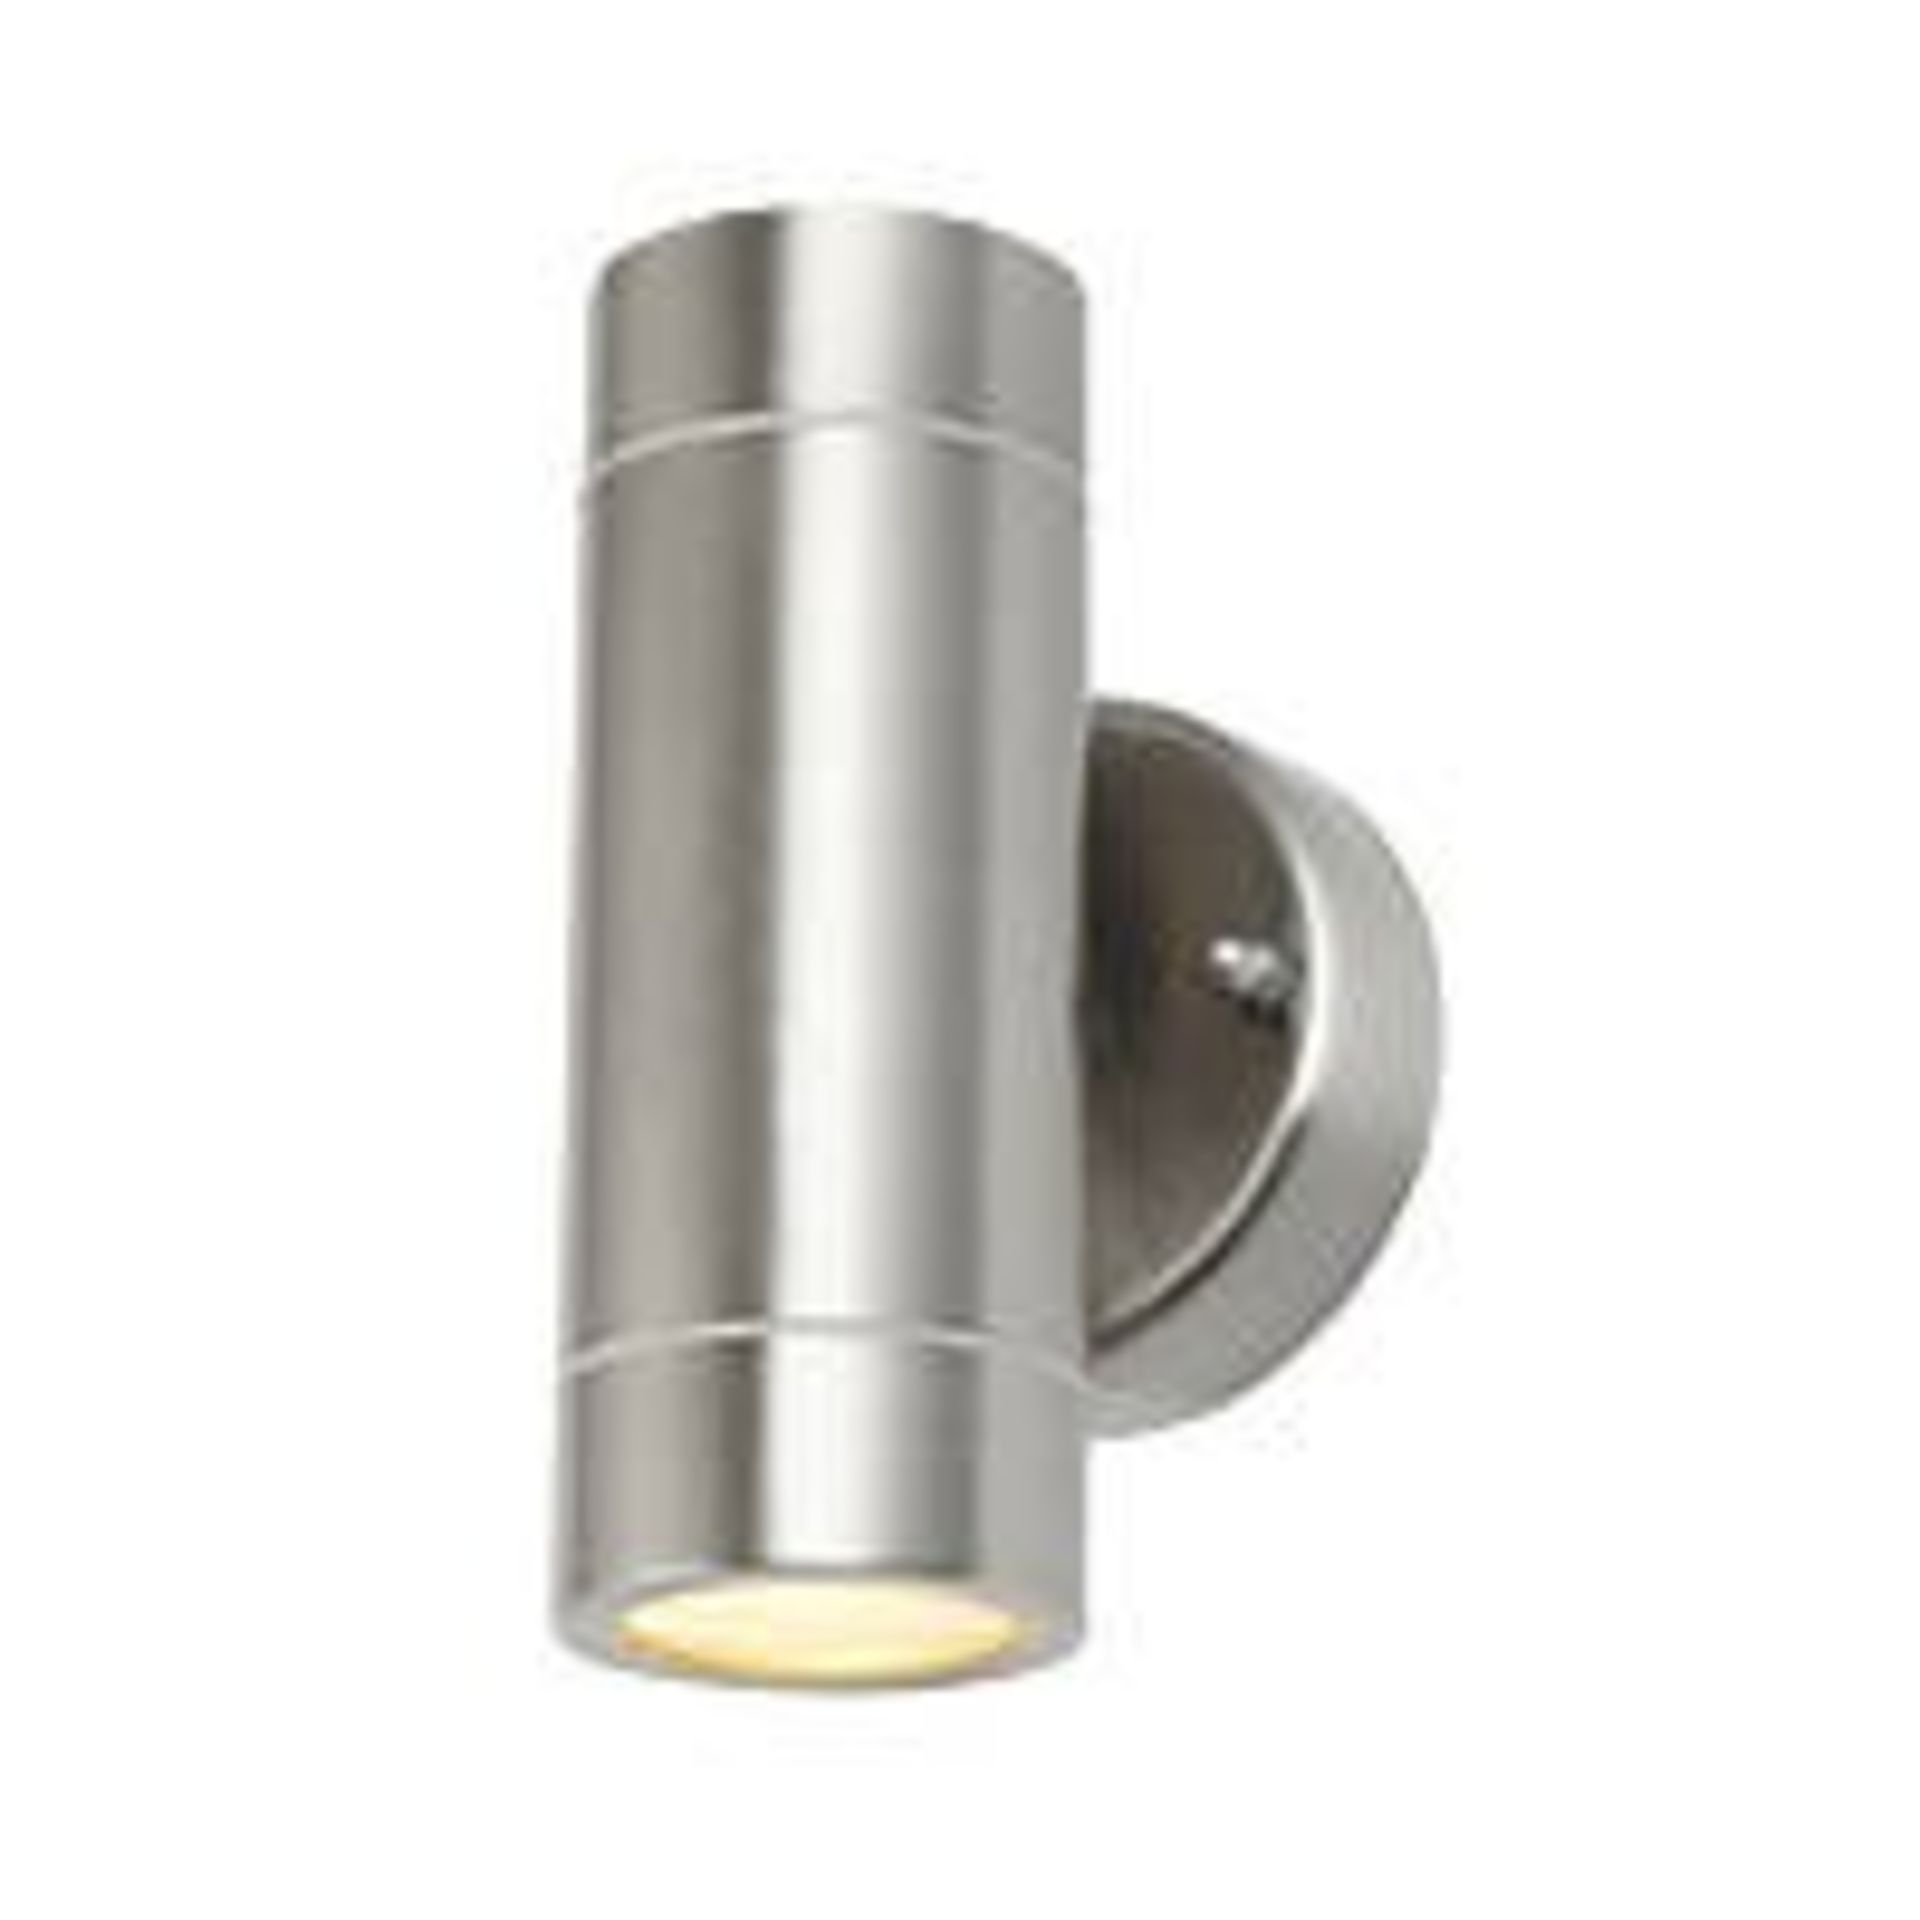 (CK107) Blooma Candiac Silver effect Mains-powered LED Outdoor Wall light 760lm You can install...